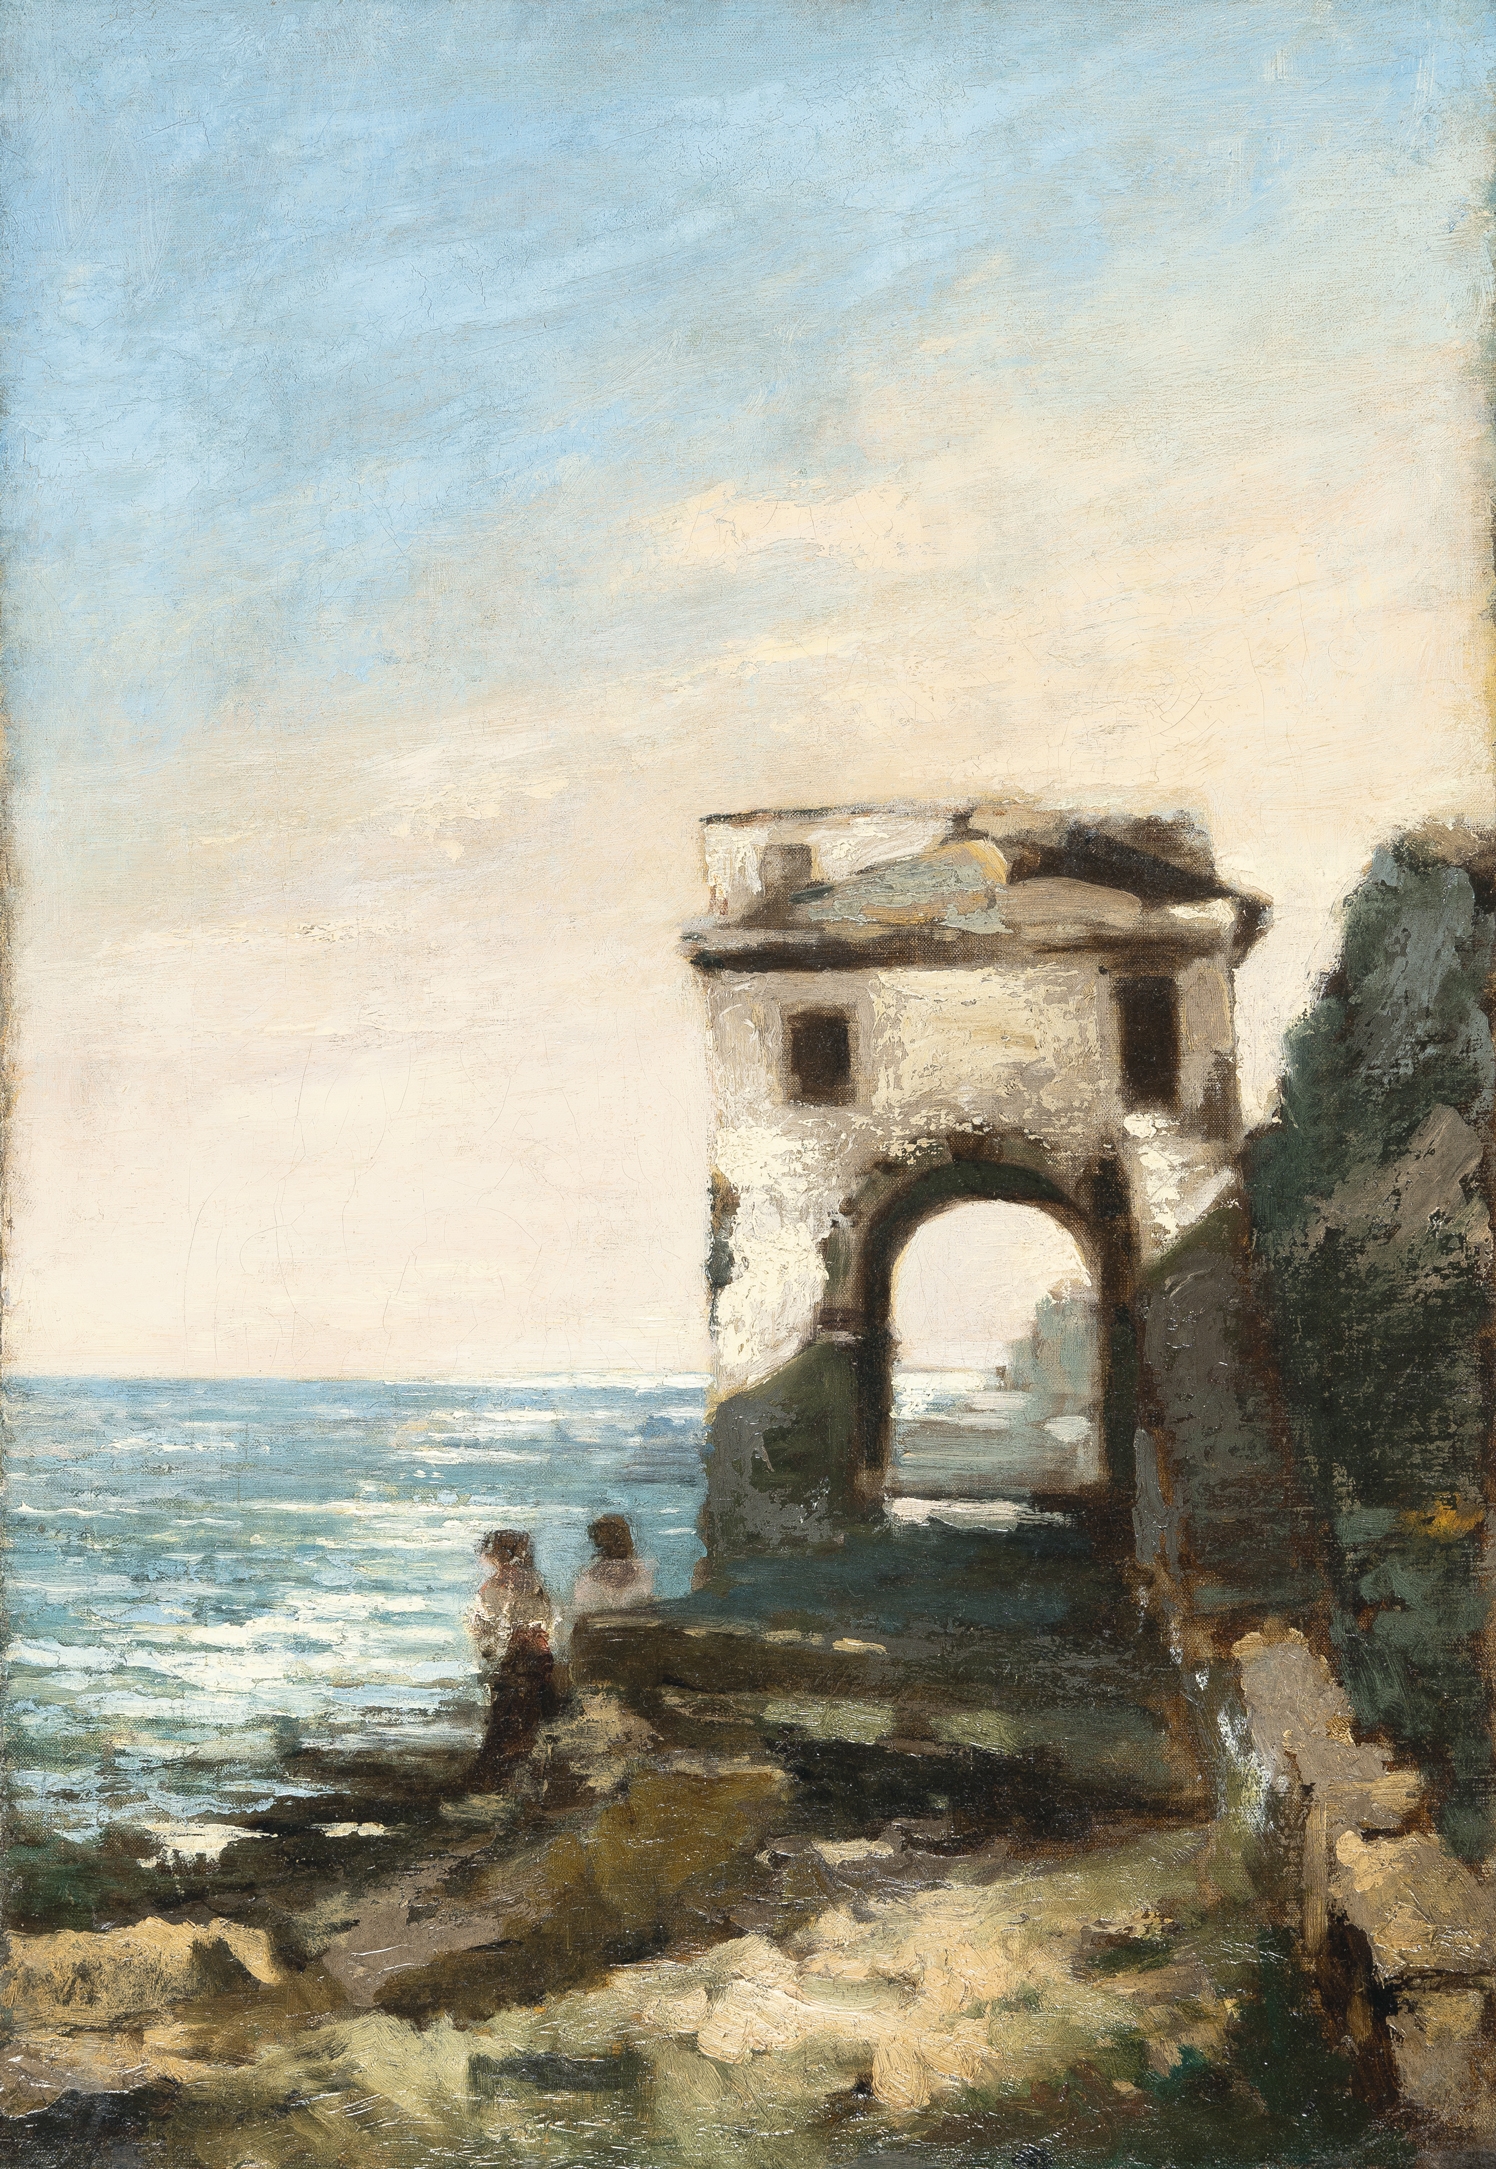 Gate arch on the French coast by Gustave Courbet, 1870